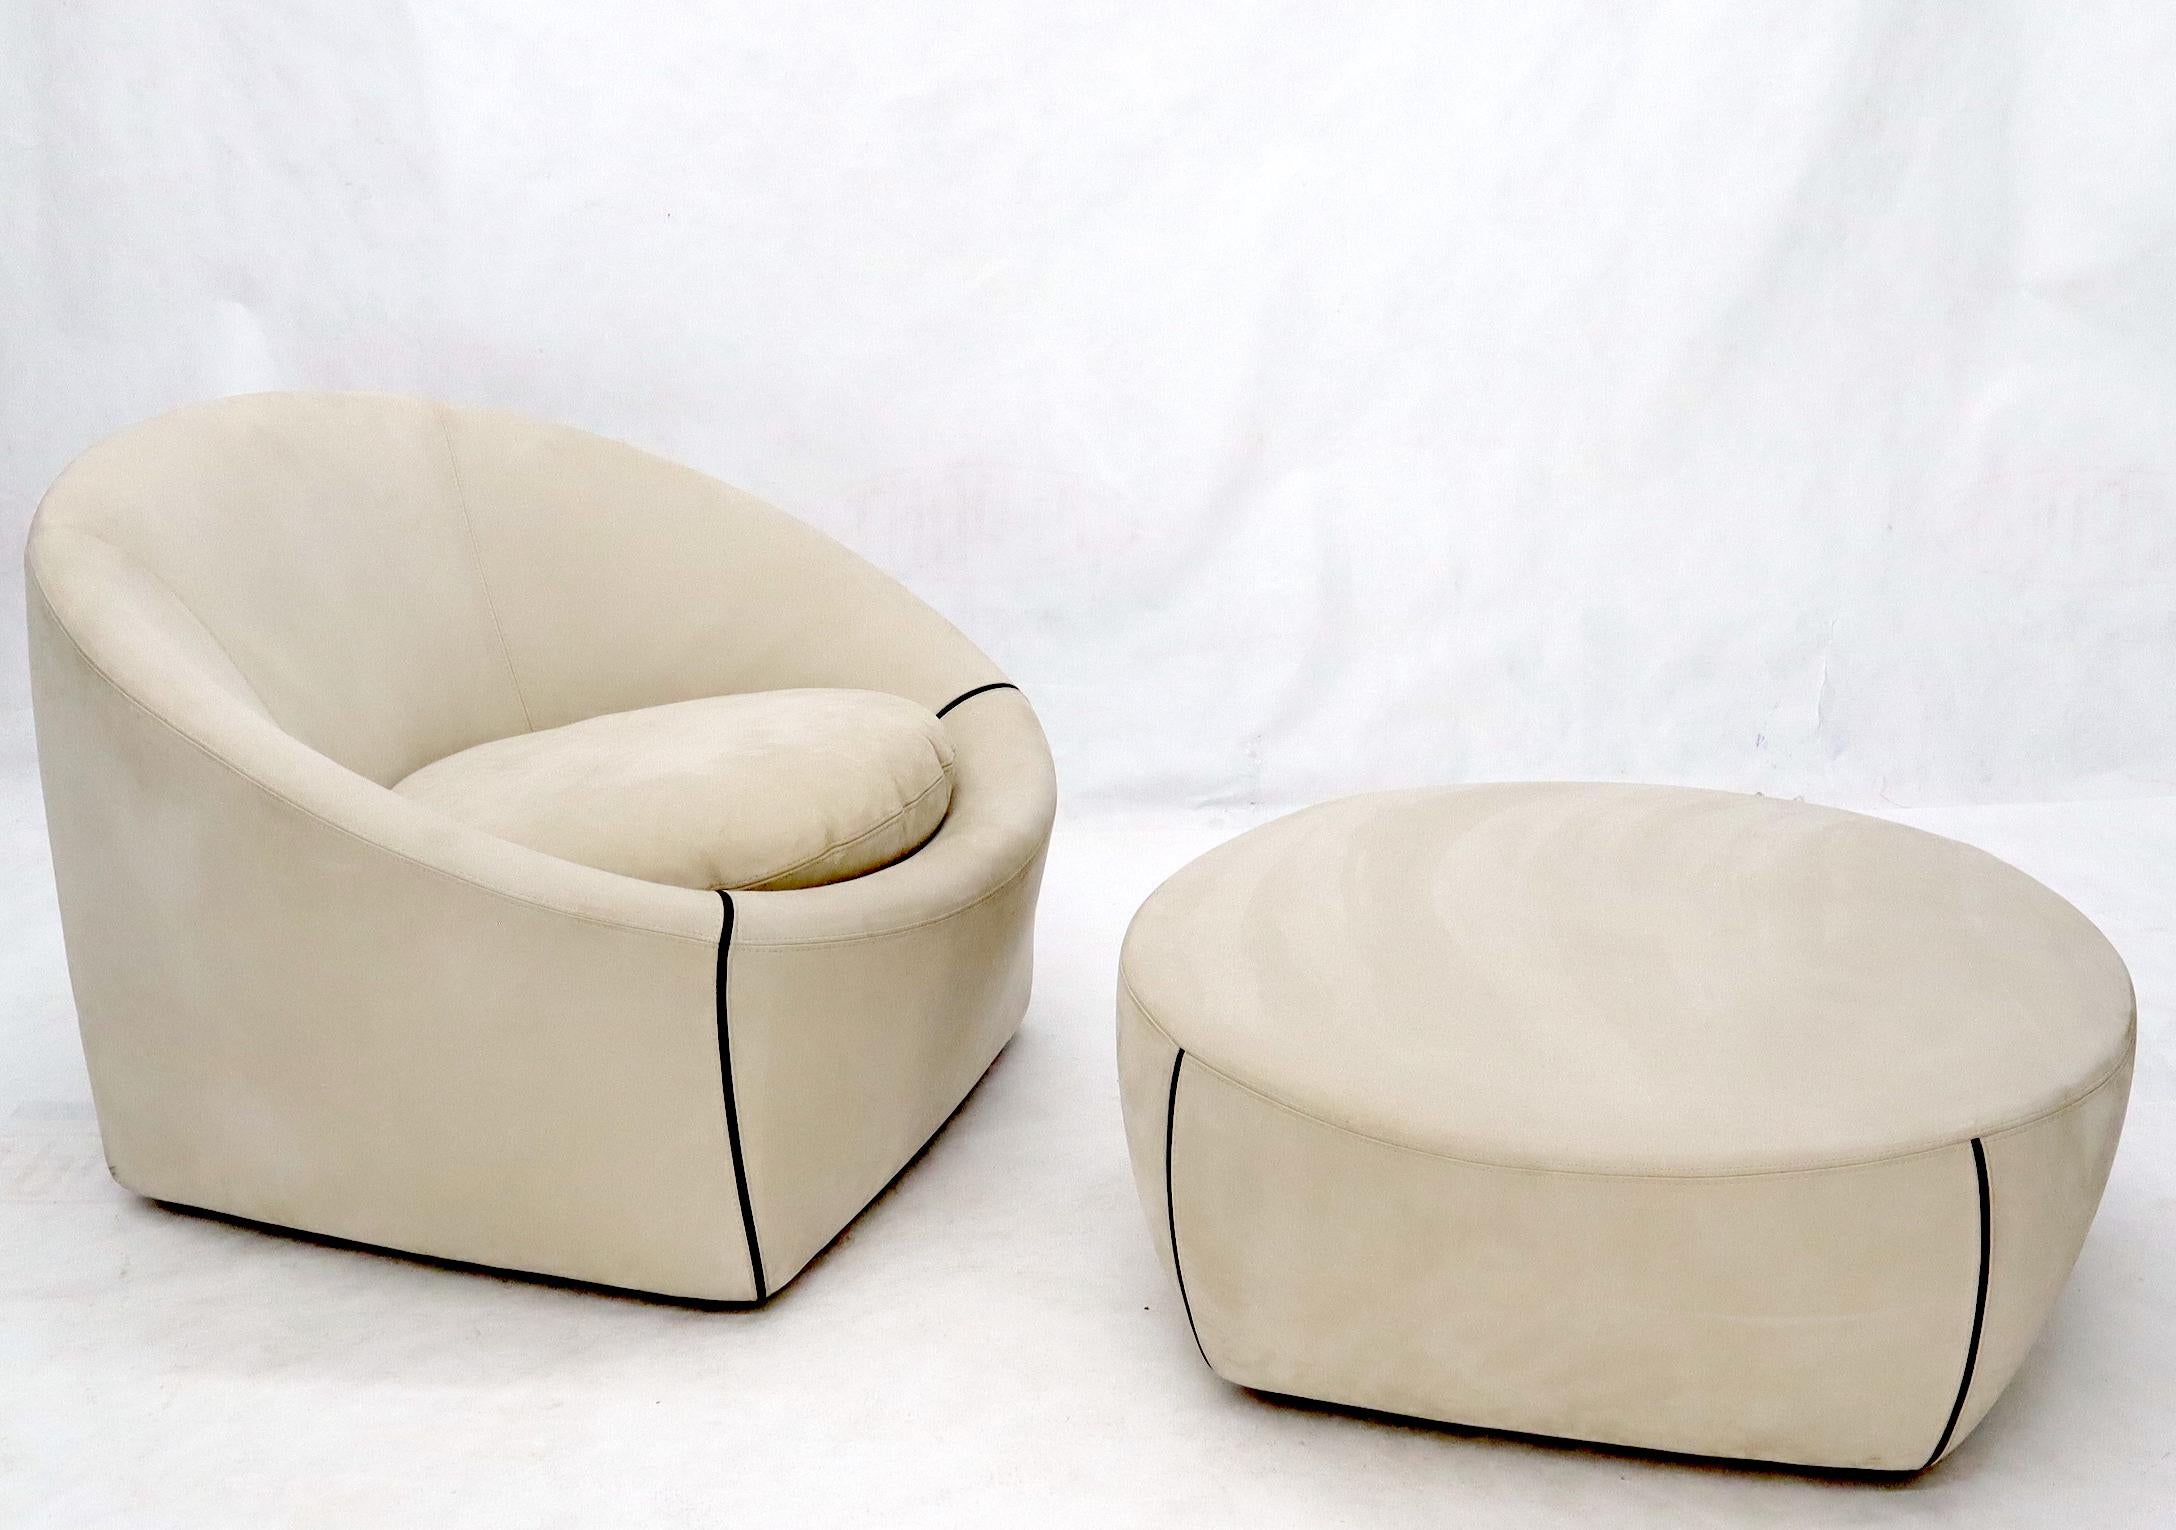 Super nice design rare pod shape lounge chair with matching ottoman by Minotti, made in Italy.